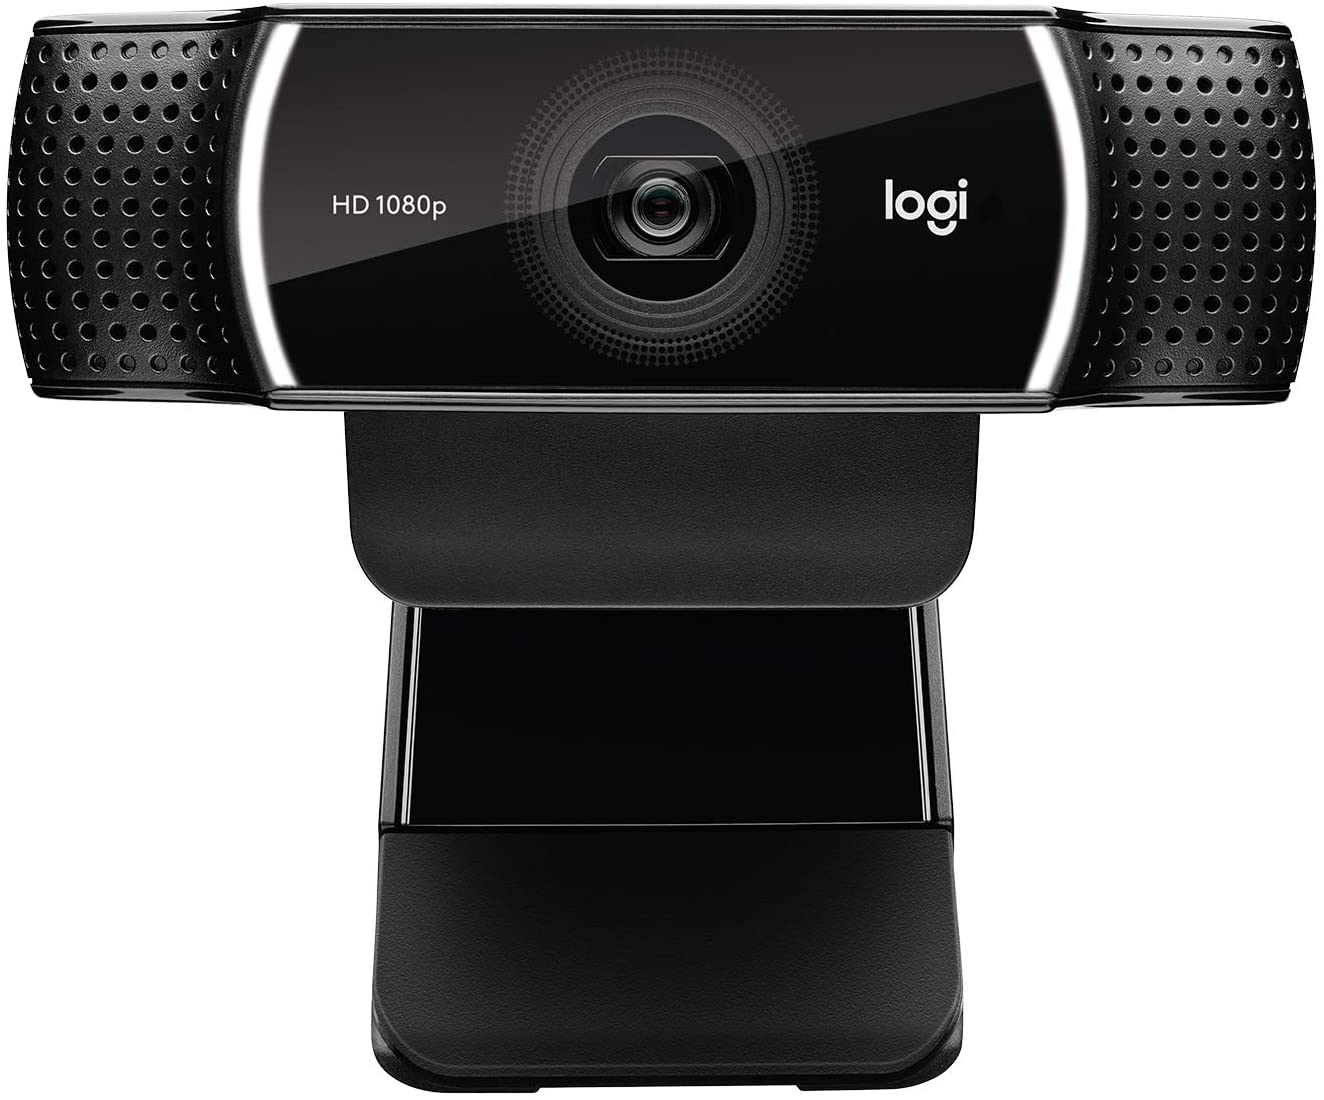 The 7 best Logitech webcams for streaming - Dot Esports